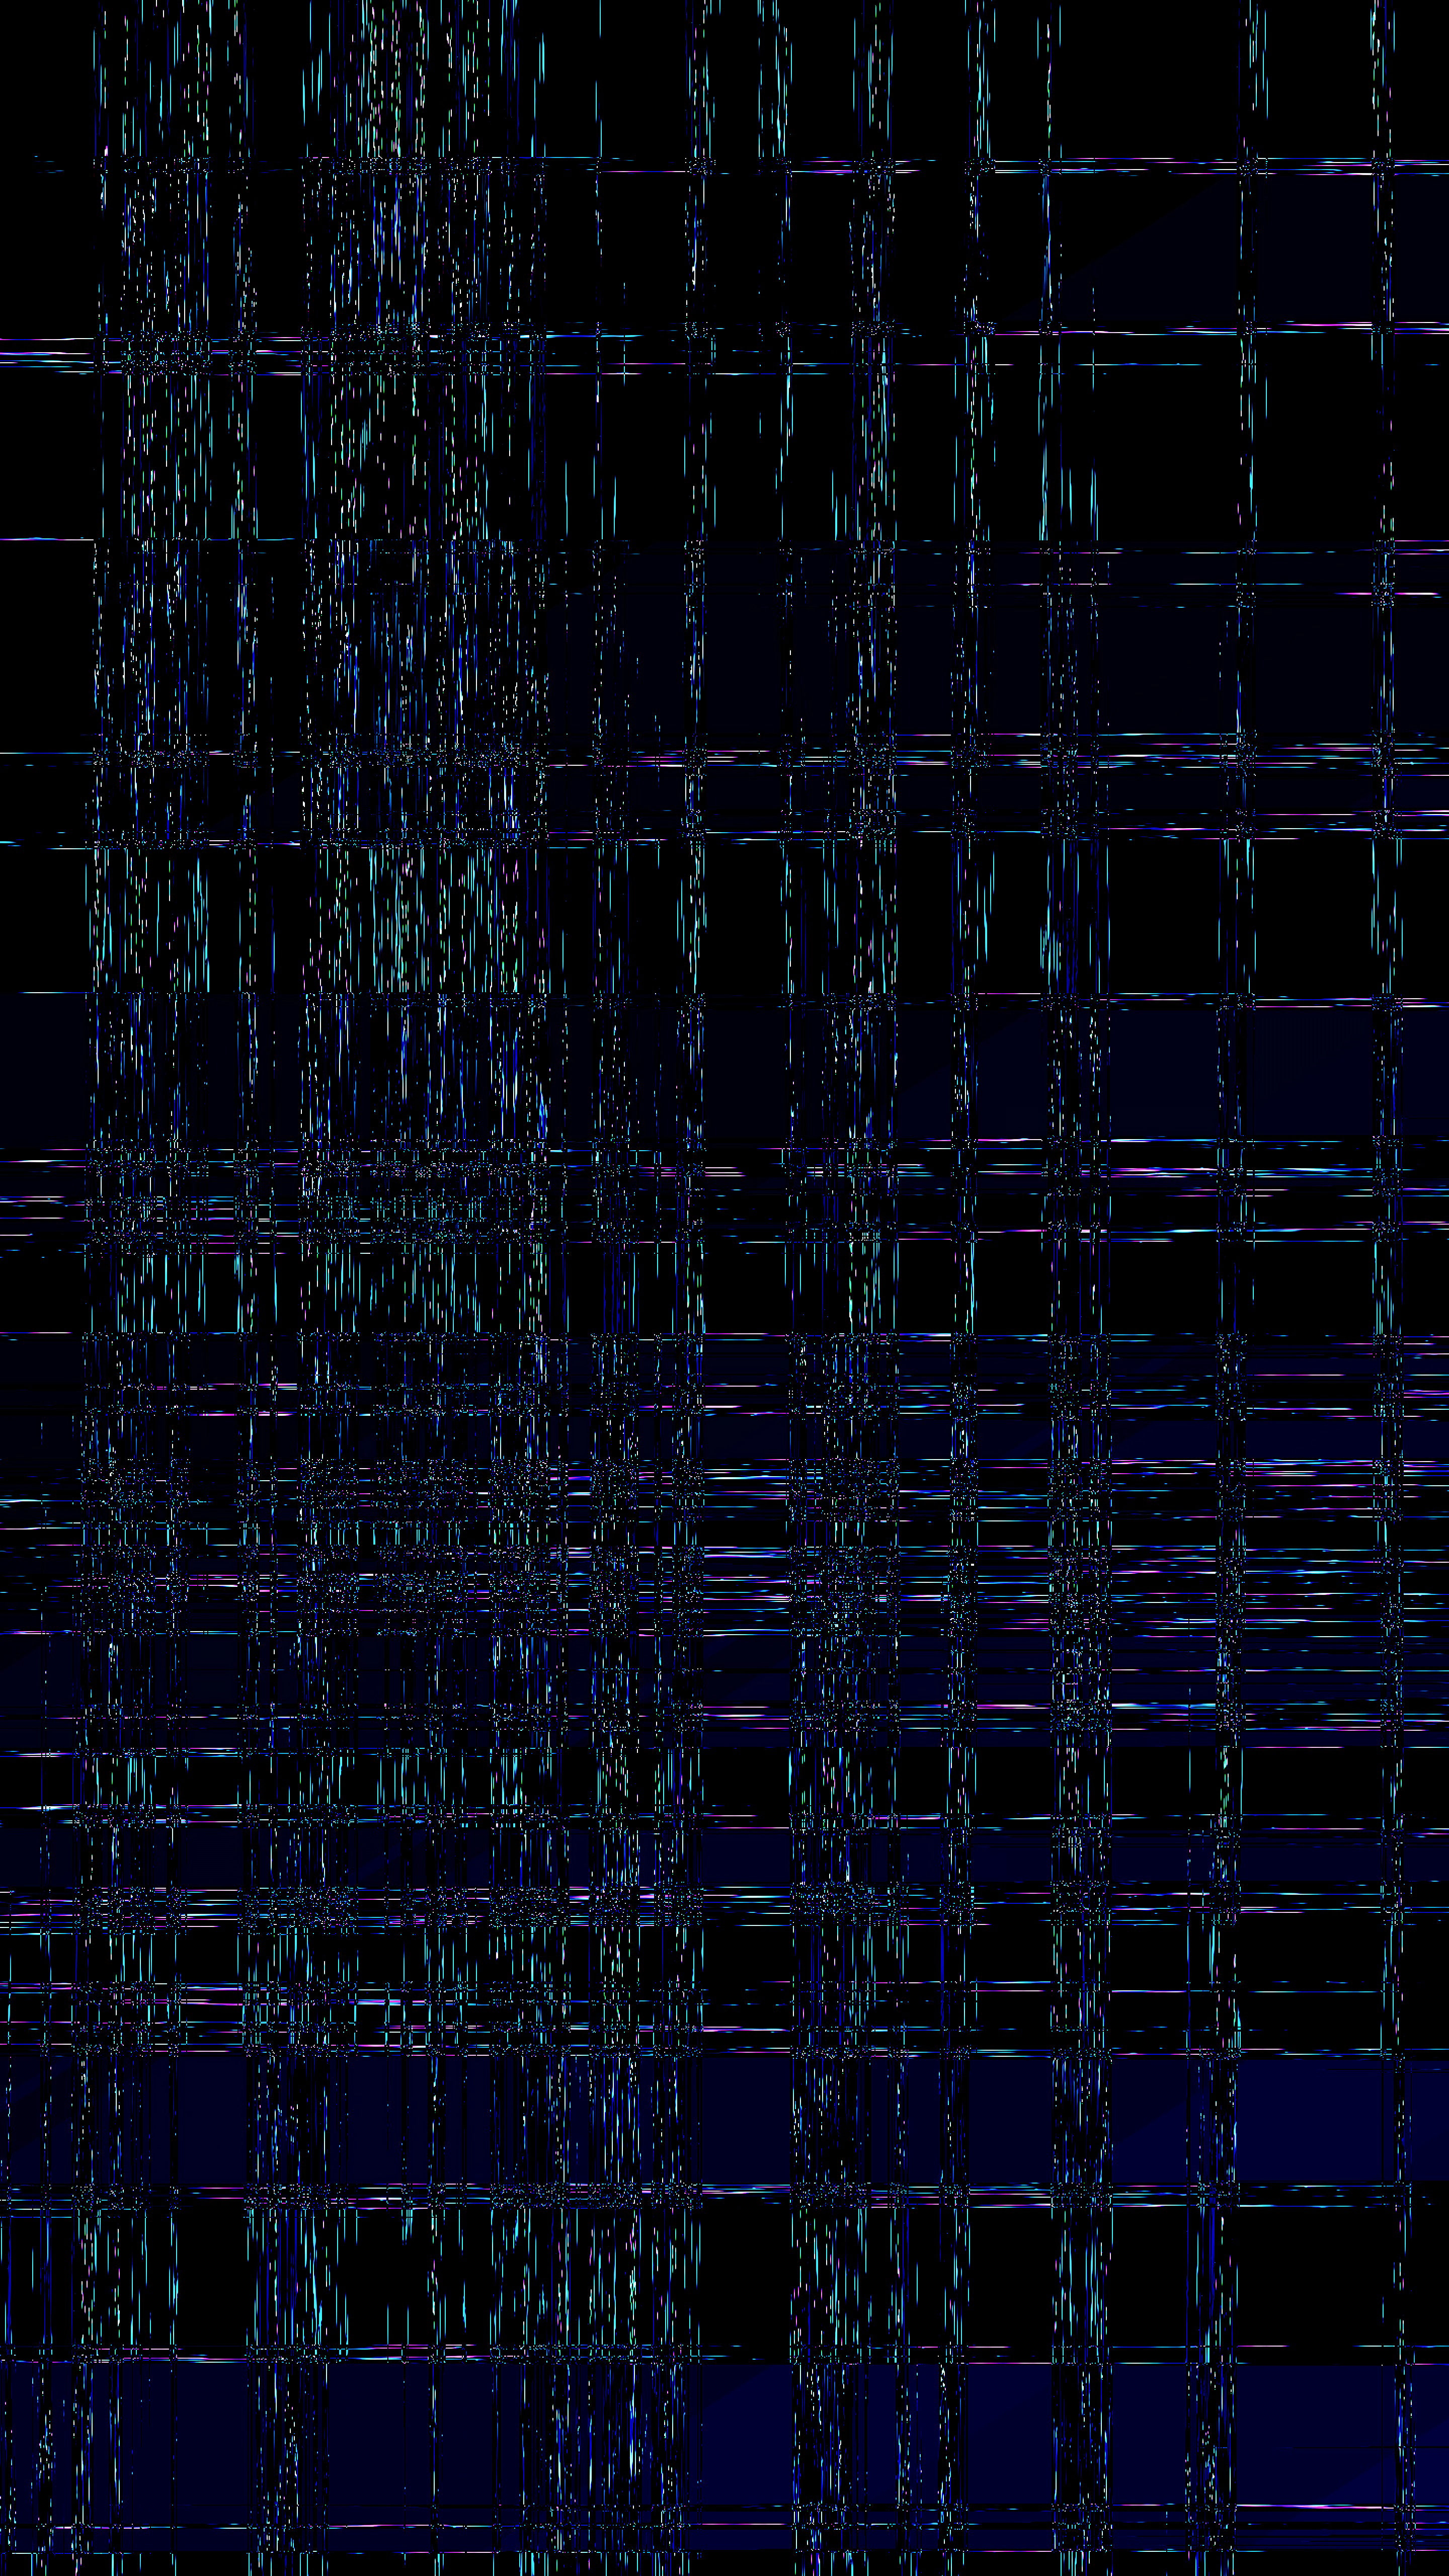 glitch, texture, textures, distortion, noise, interference, digital